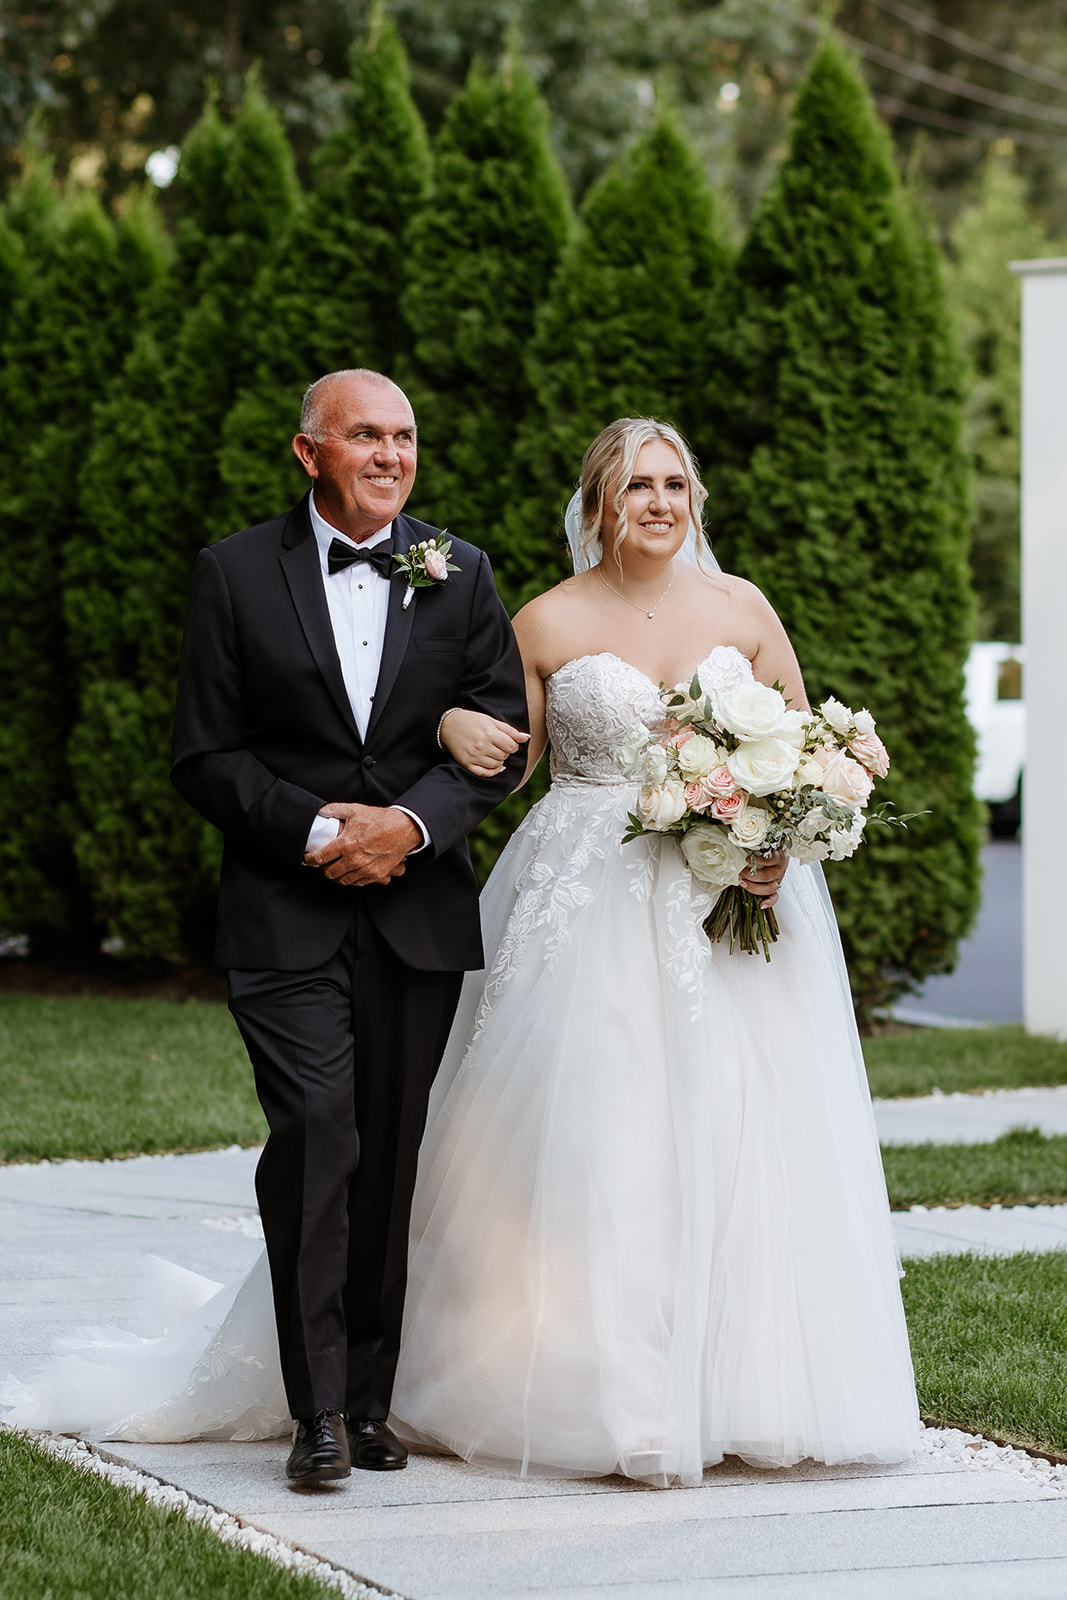 A bride in a white wedding gown holding a bouquet walks arm in arm with an older man in a black tuxedo, both smiling as they proceed along a pathway bordered by conical shrubs.